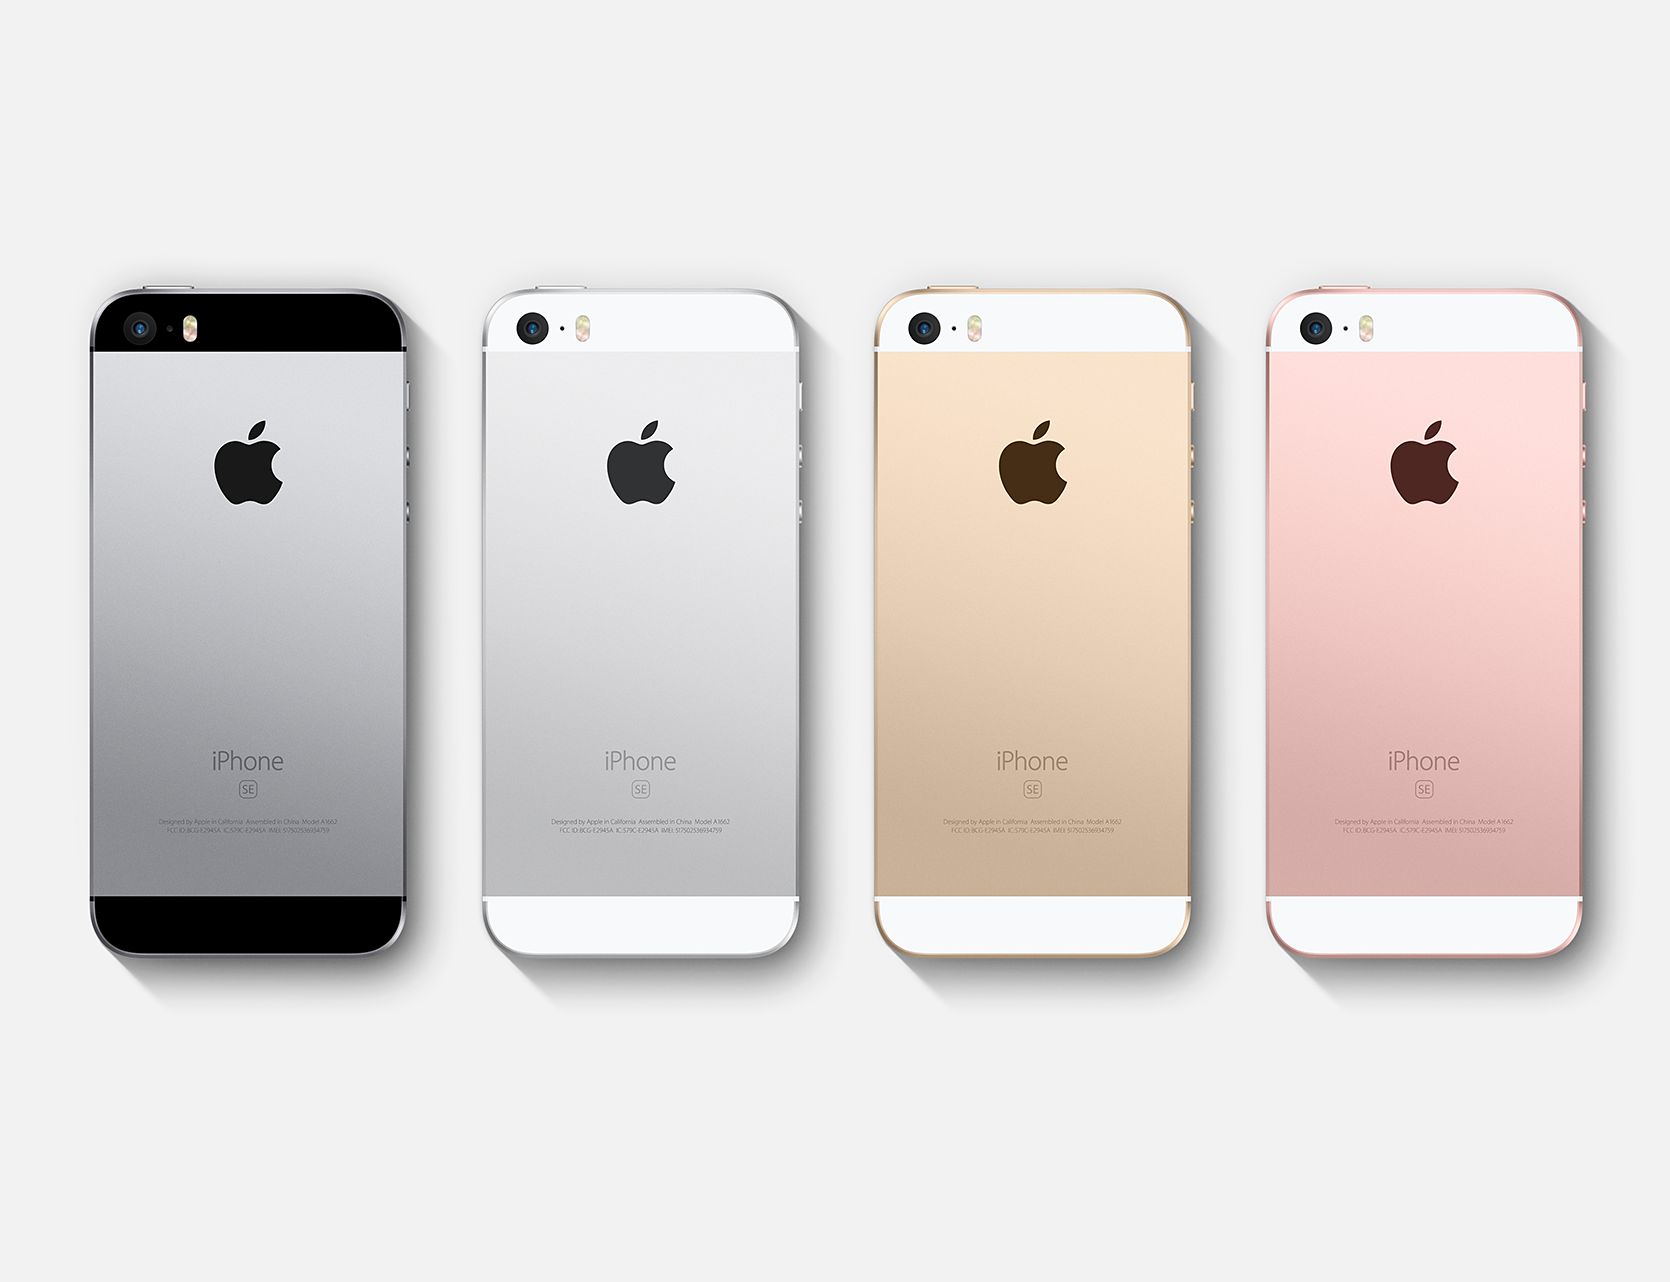 Promotion: buy the 128GB iPhone SE with 33% discount!